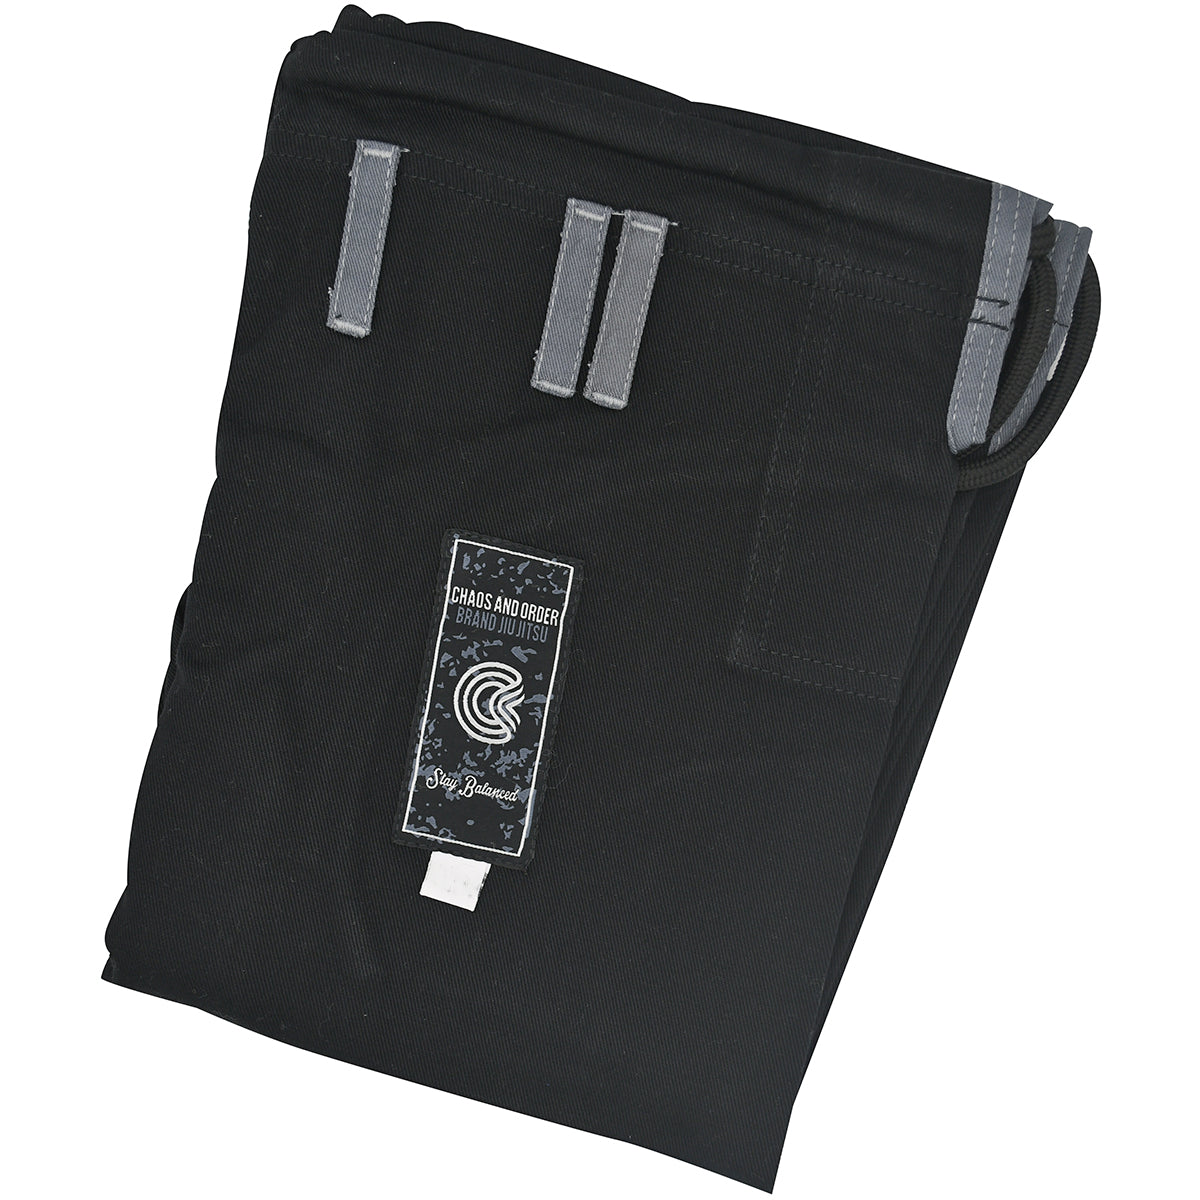 Chaos and Order Static Label BJJ Gi - Black Chaos and Order